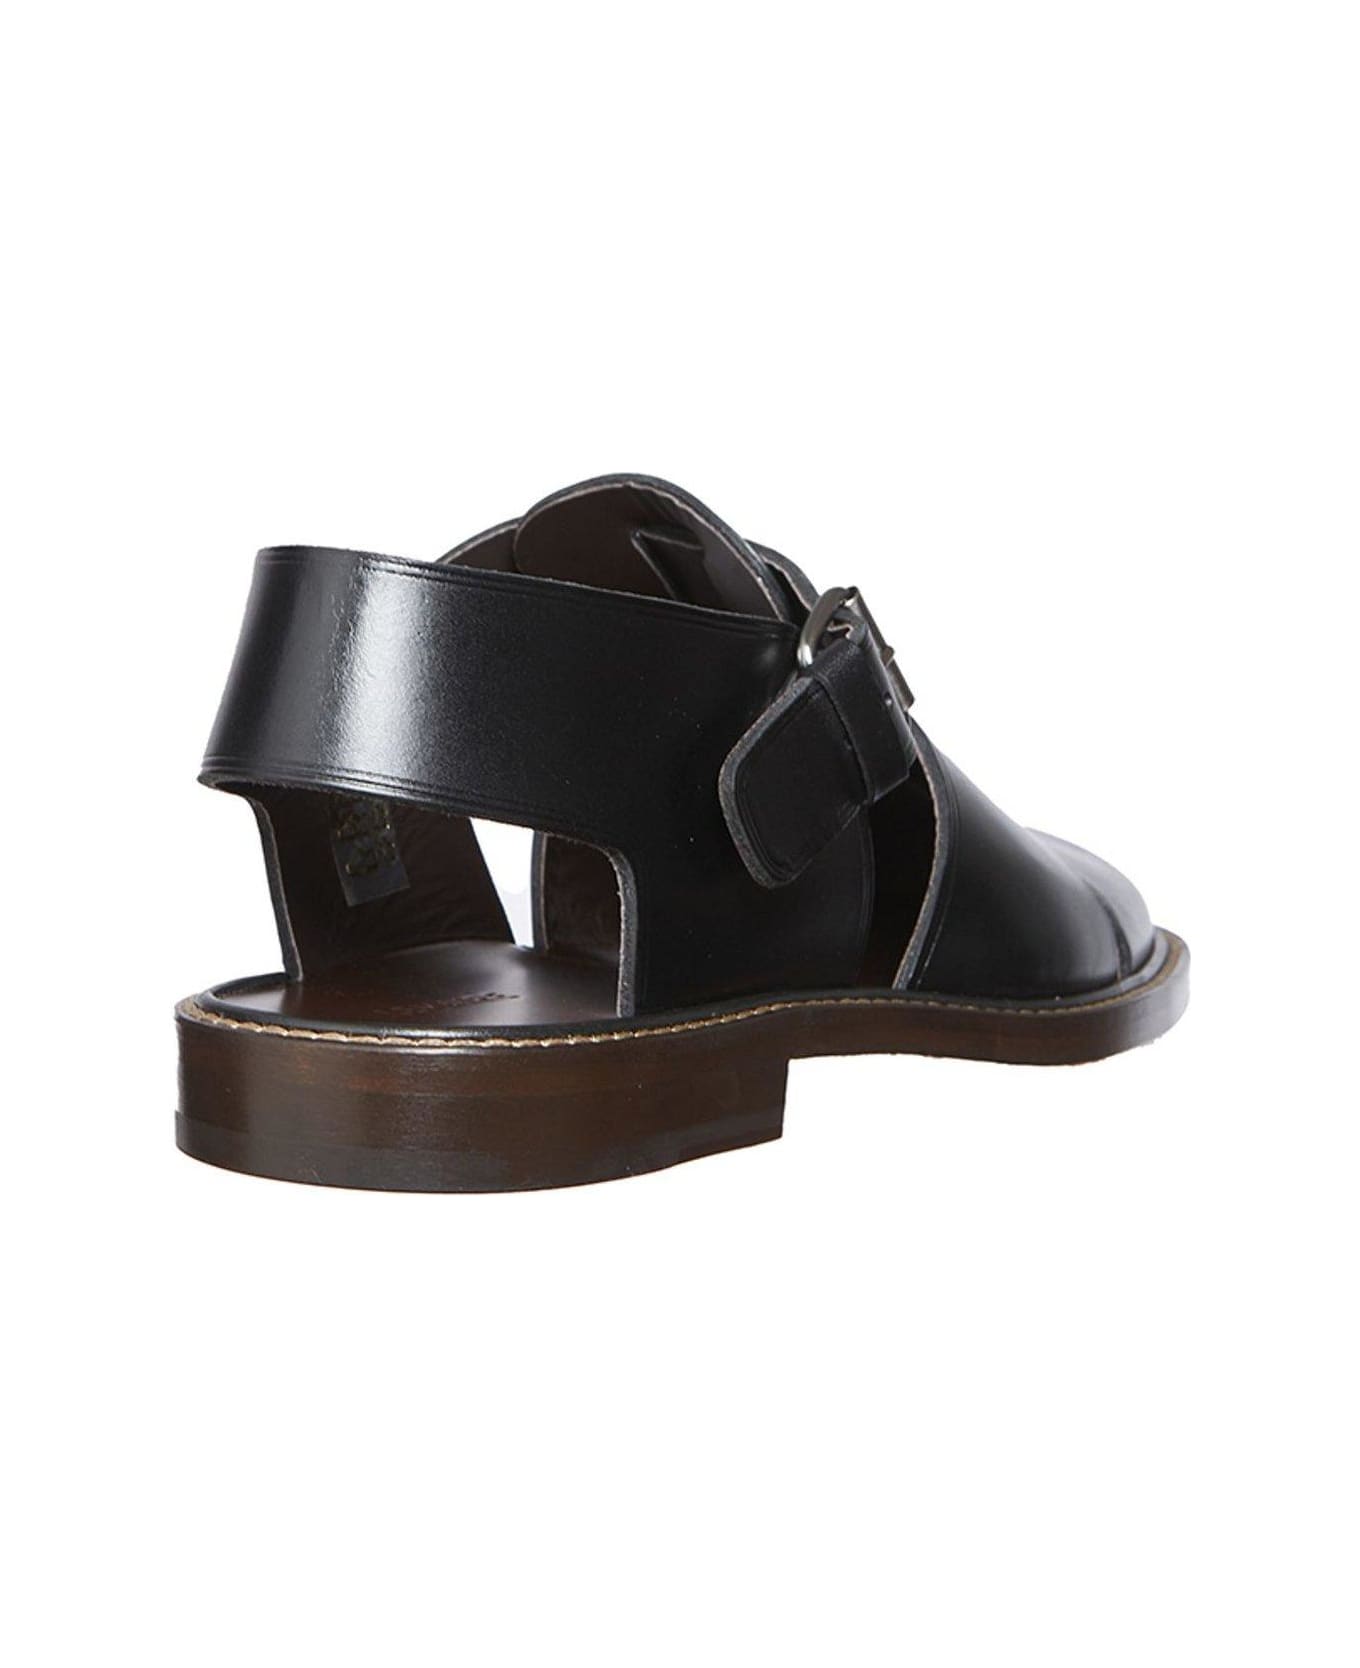 Lemaire Buckled Slingback Sandals - BLACK その他各種シューズ